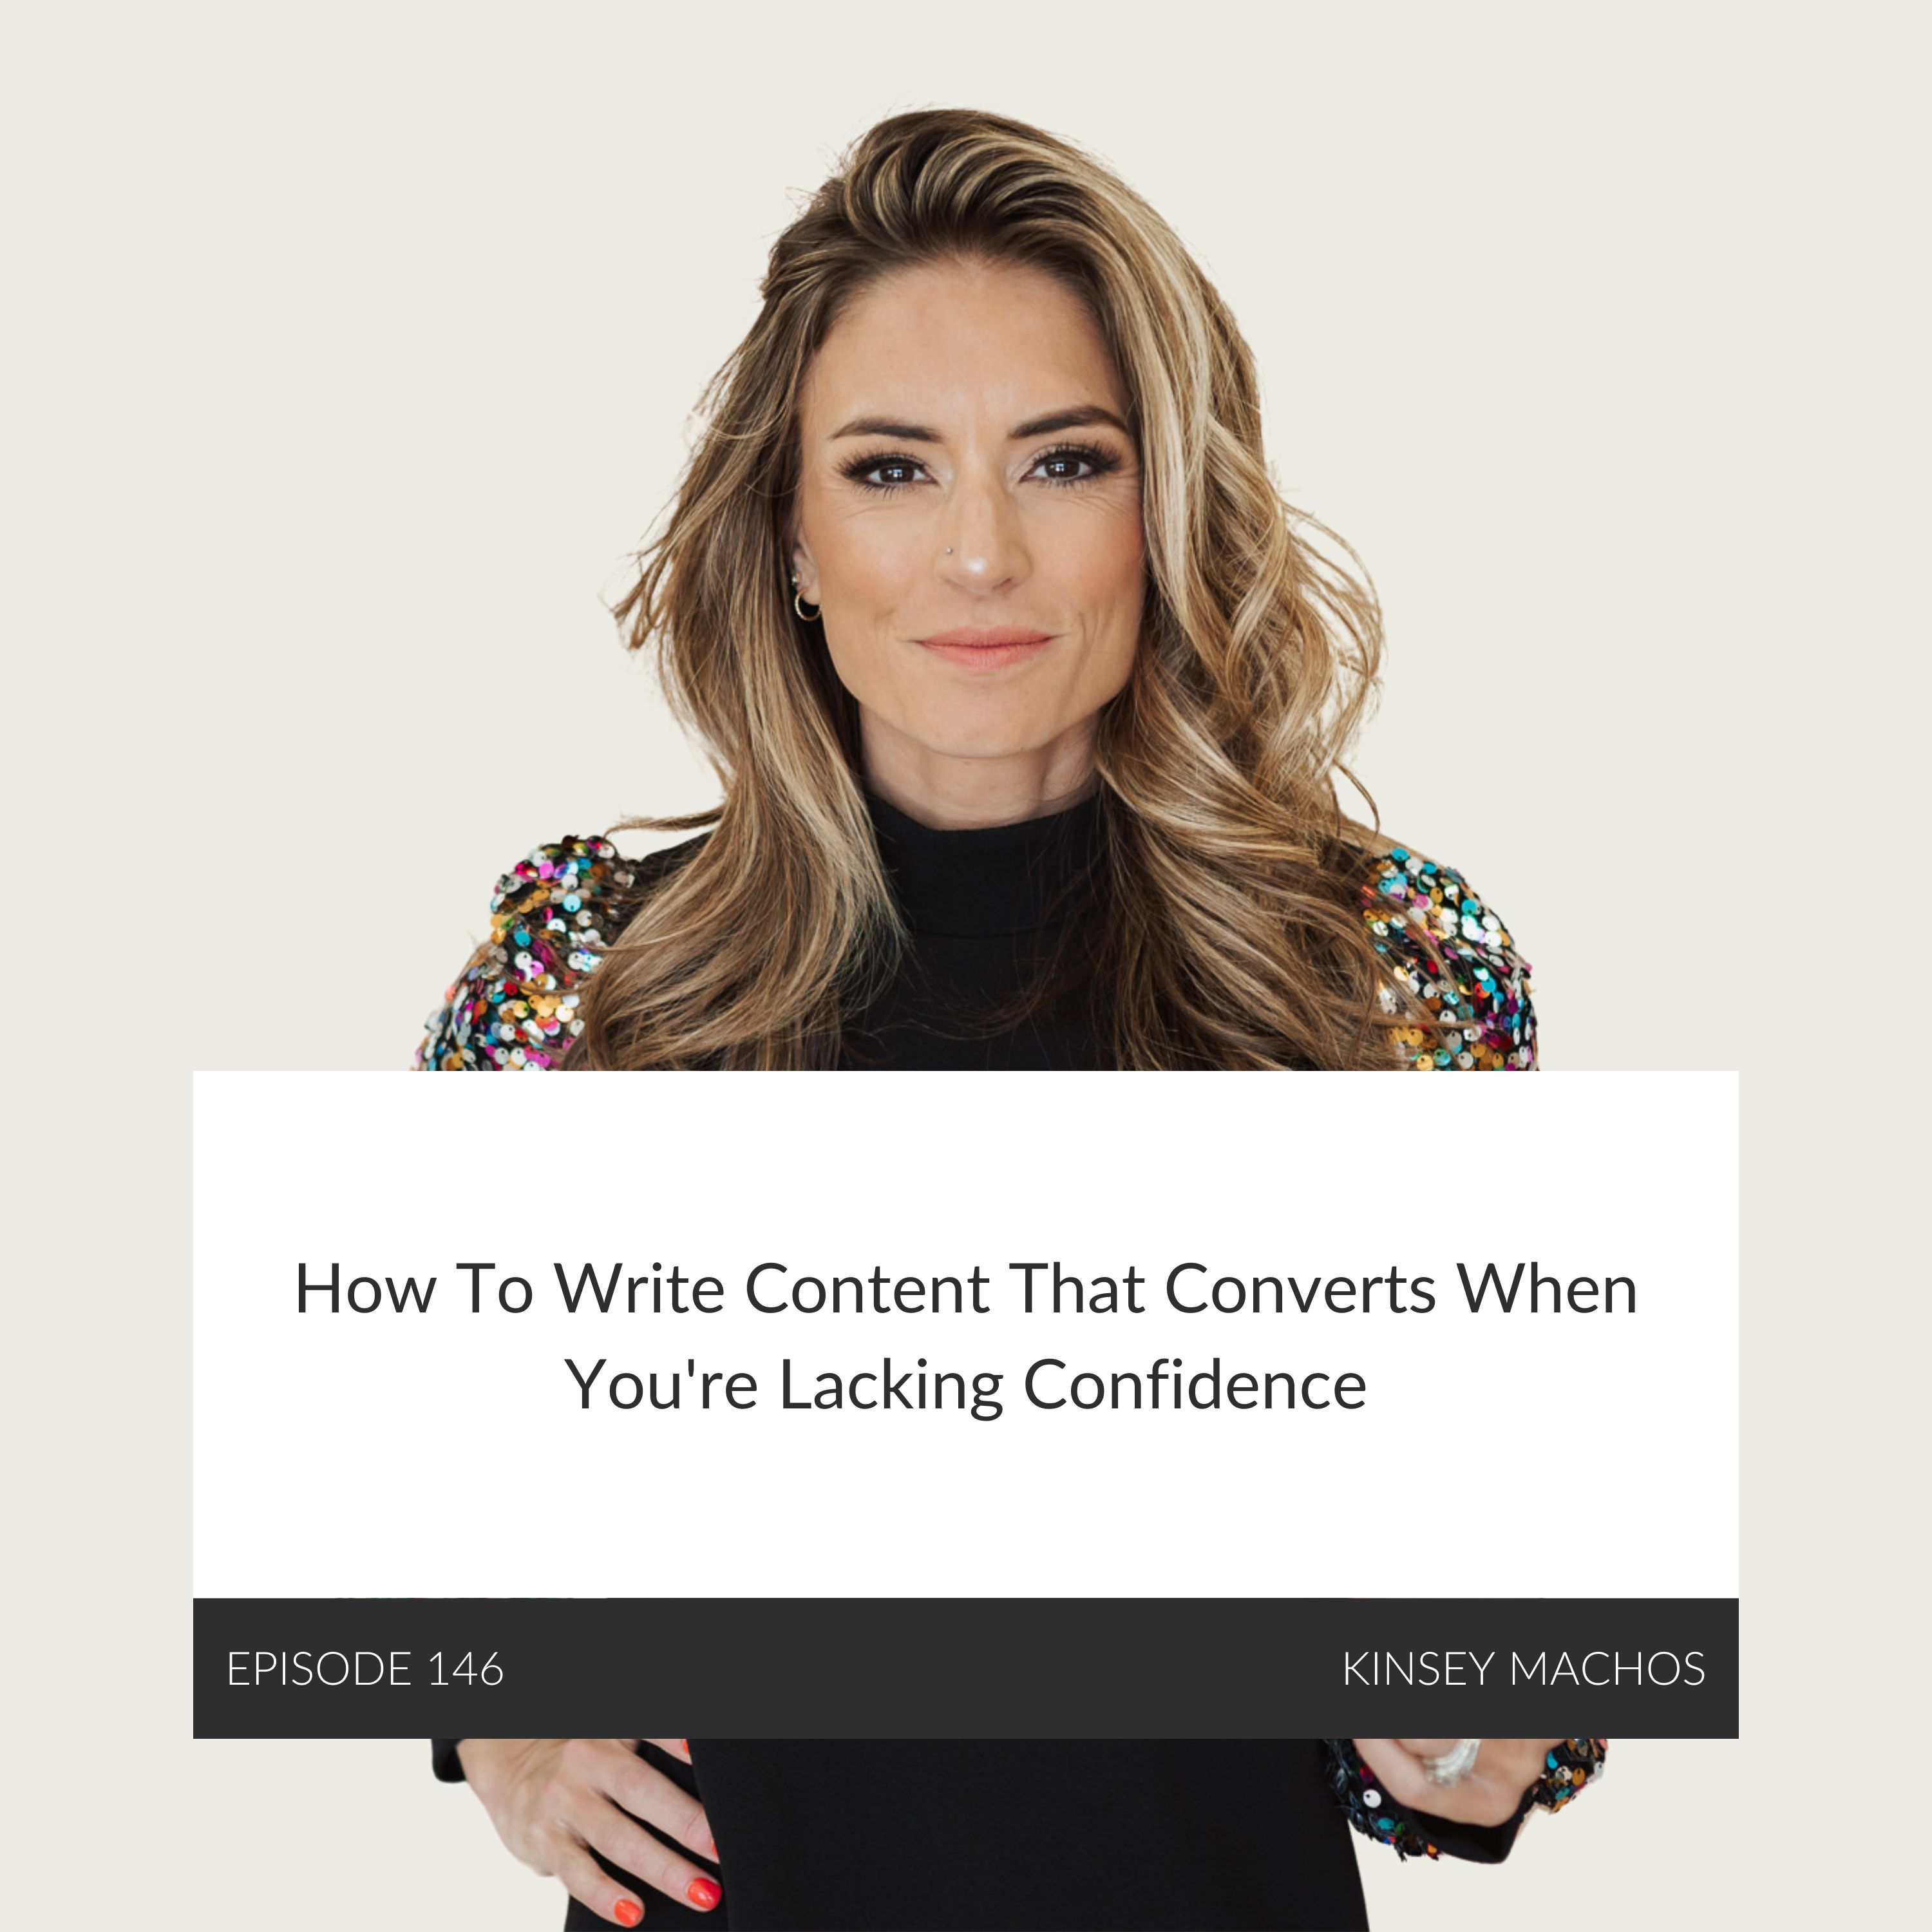 How To Write Content That Converts When You’re Lacking Confidence